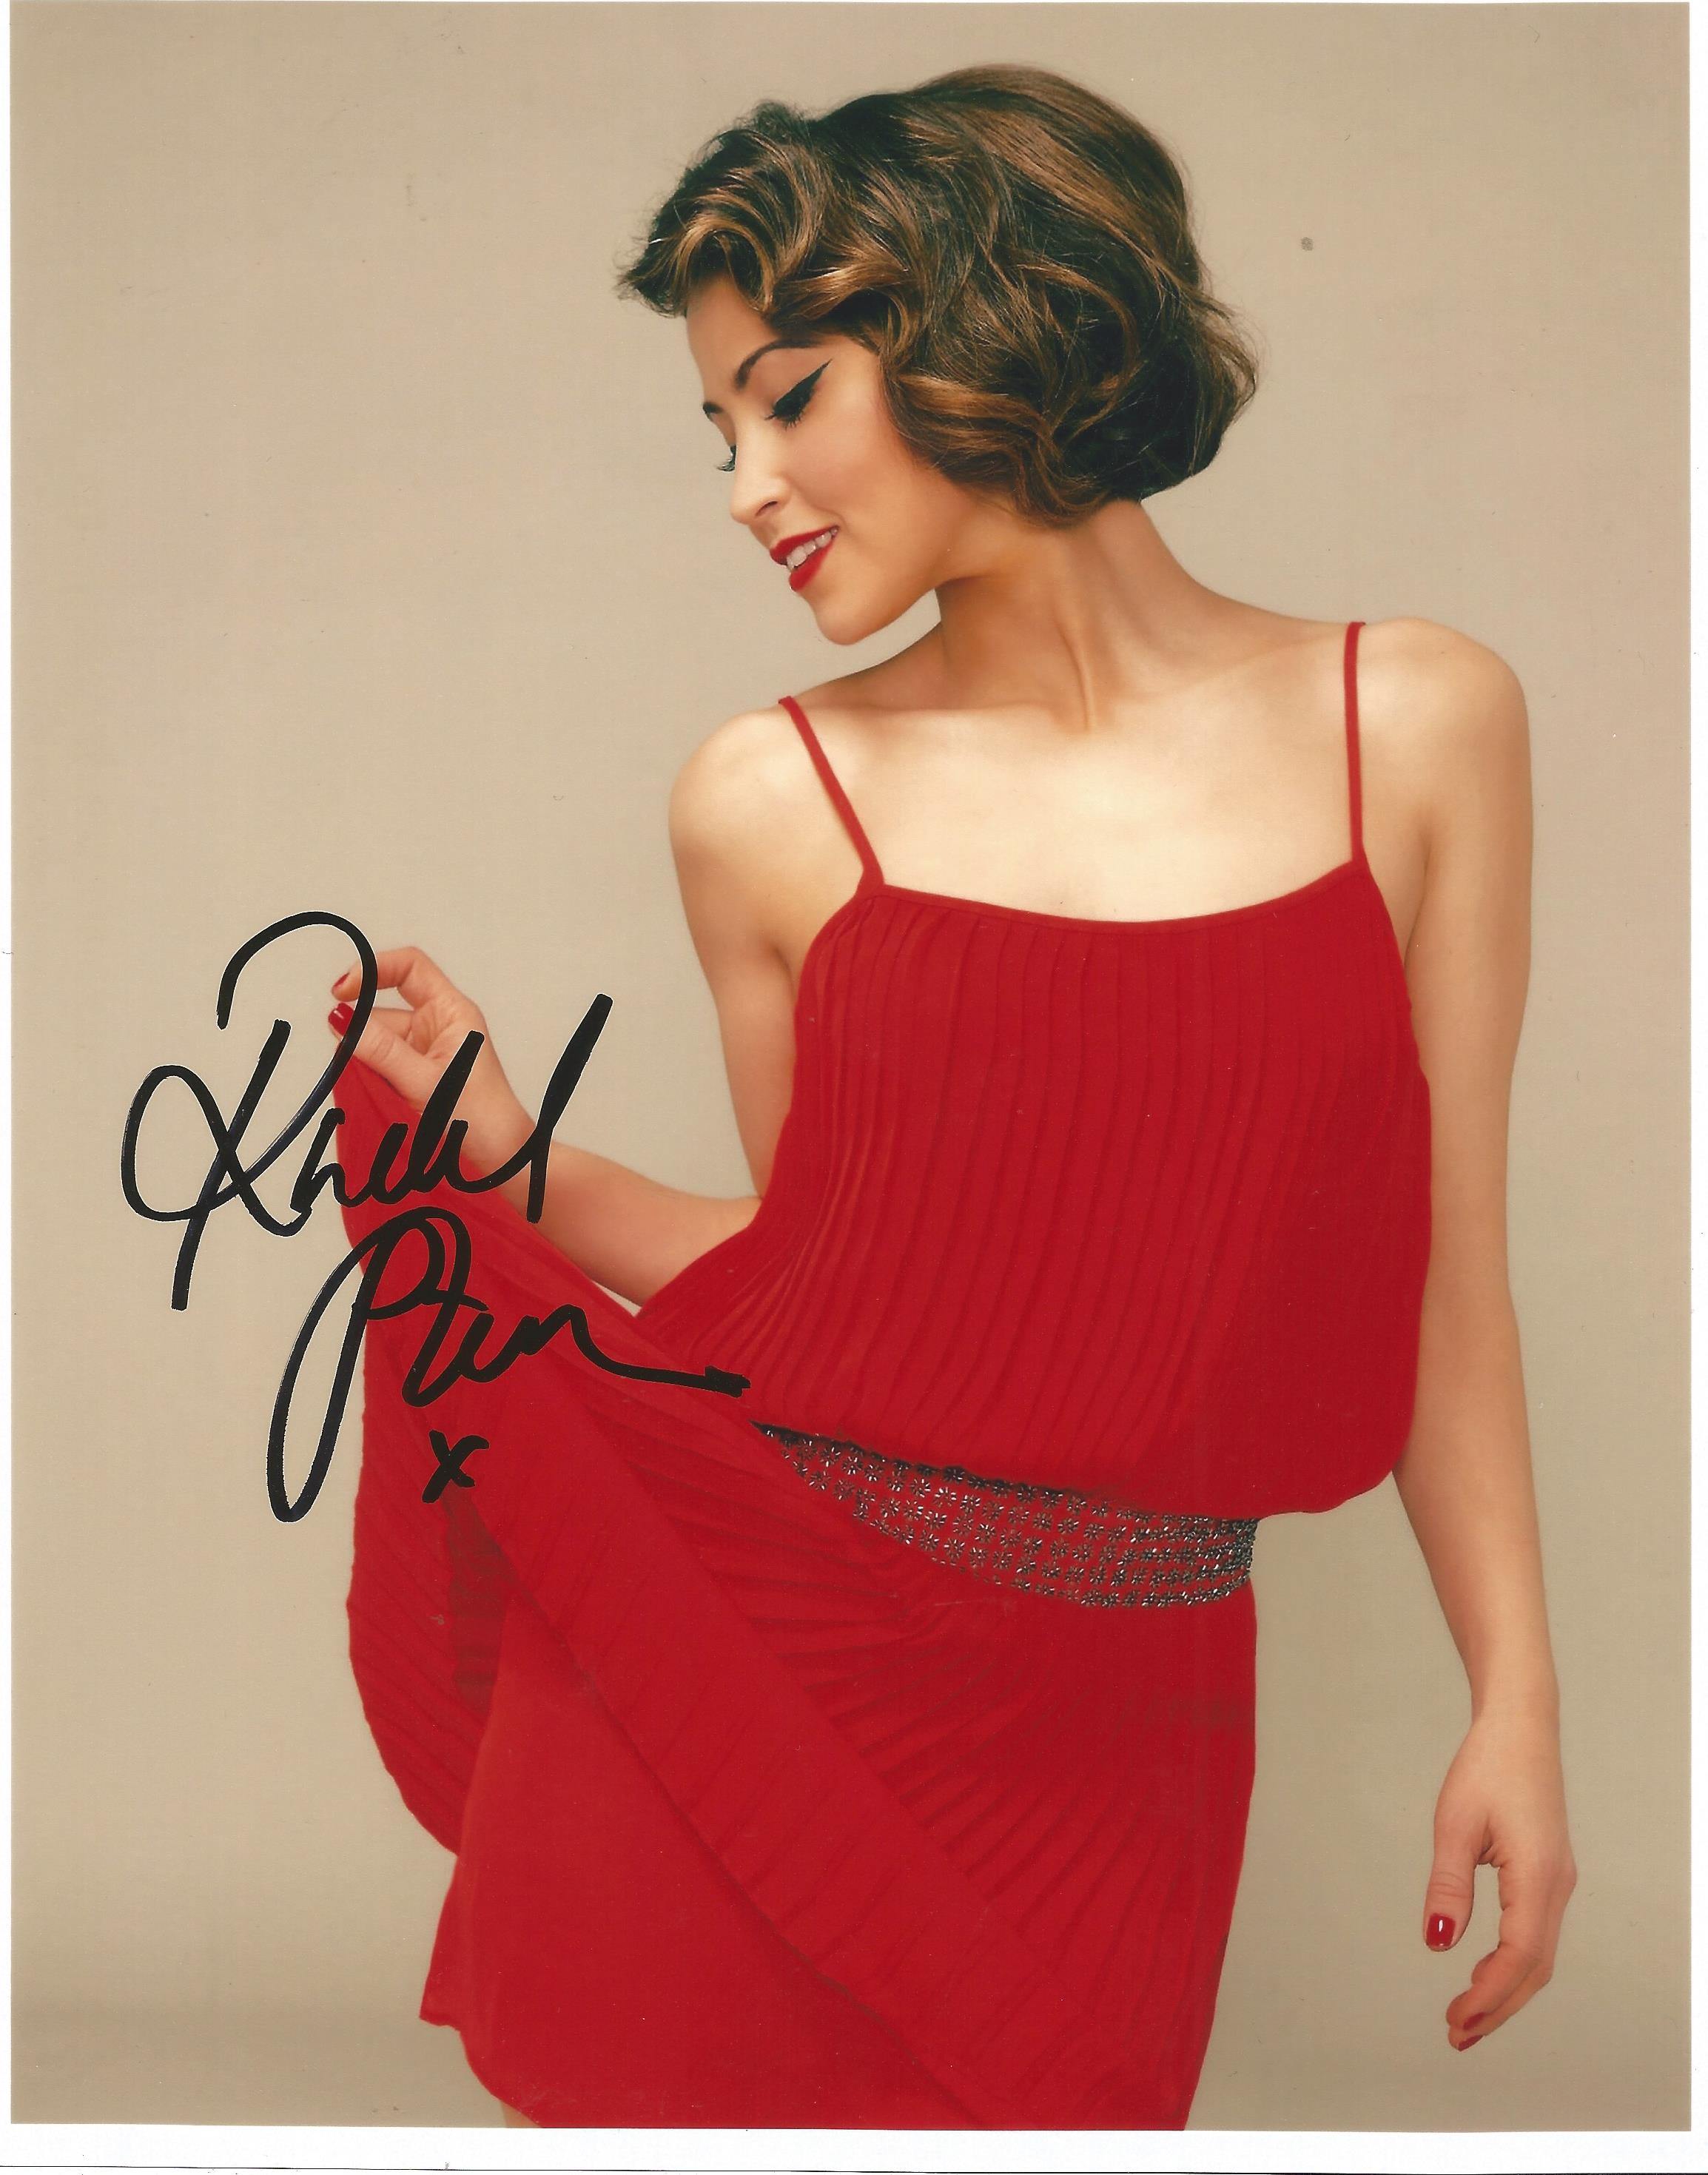 Rachel Stevens Singer Signed 8x10 Photo. Good Condition. All autographs are genuine hand signed